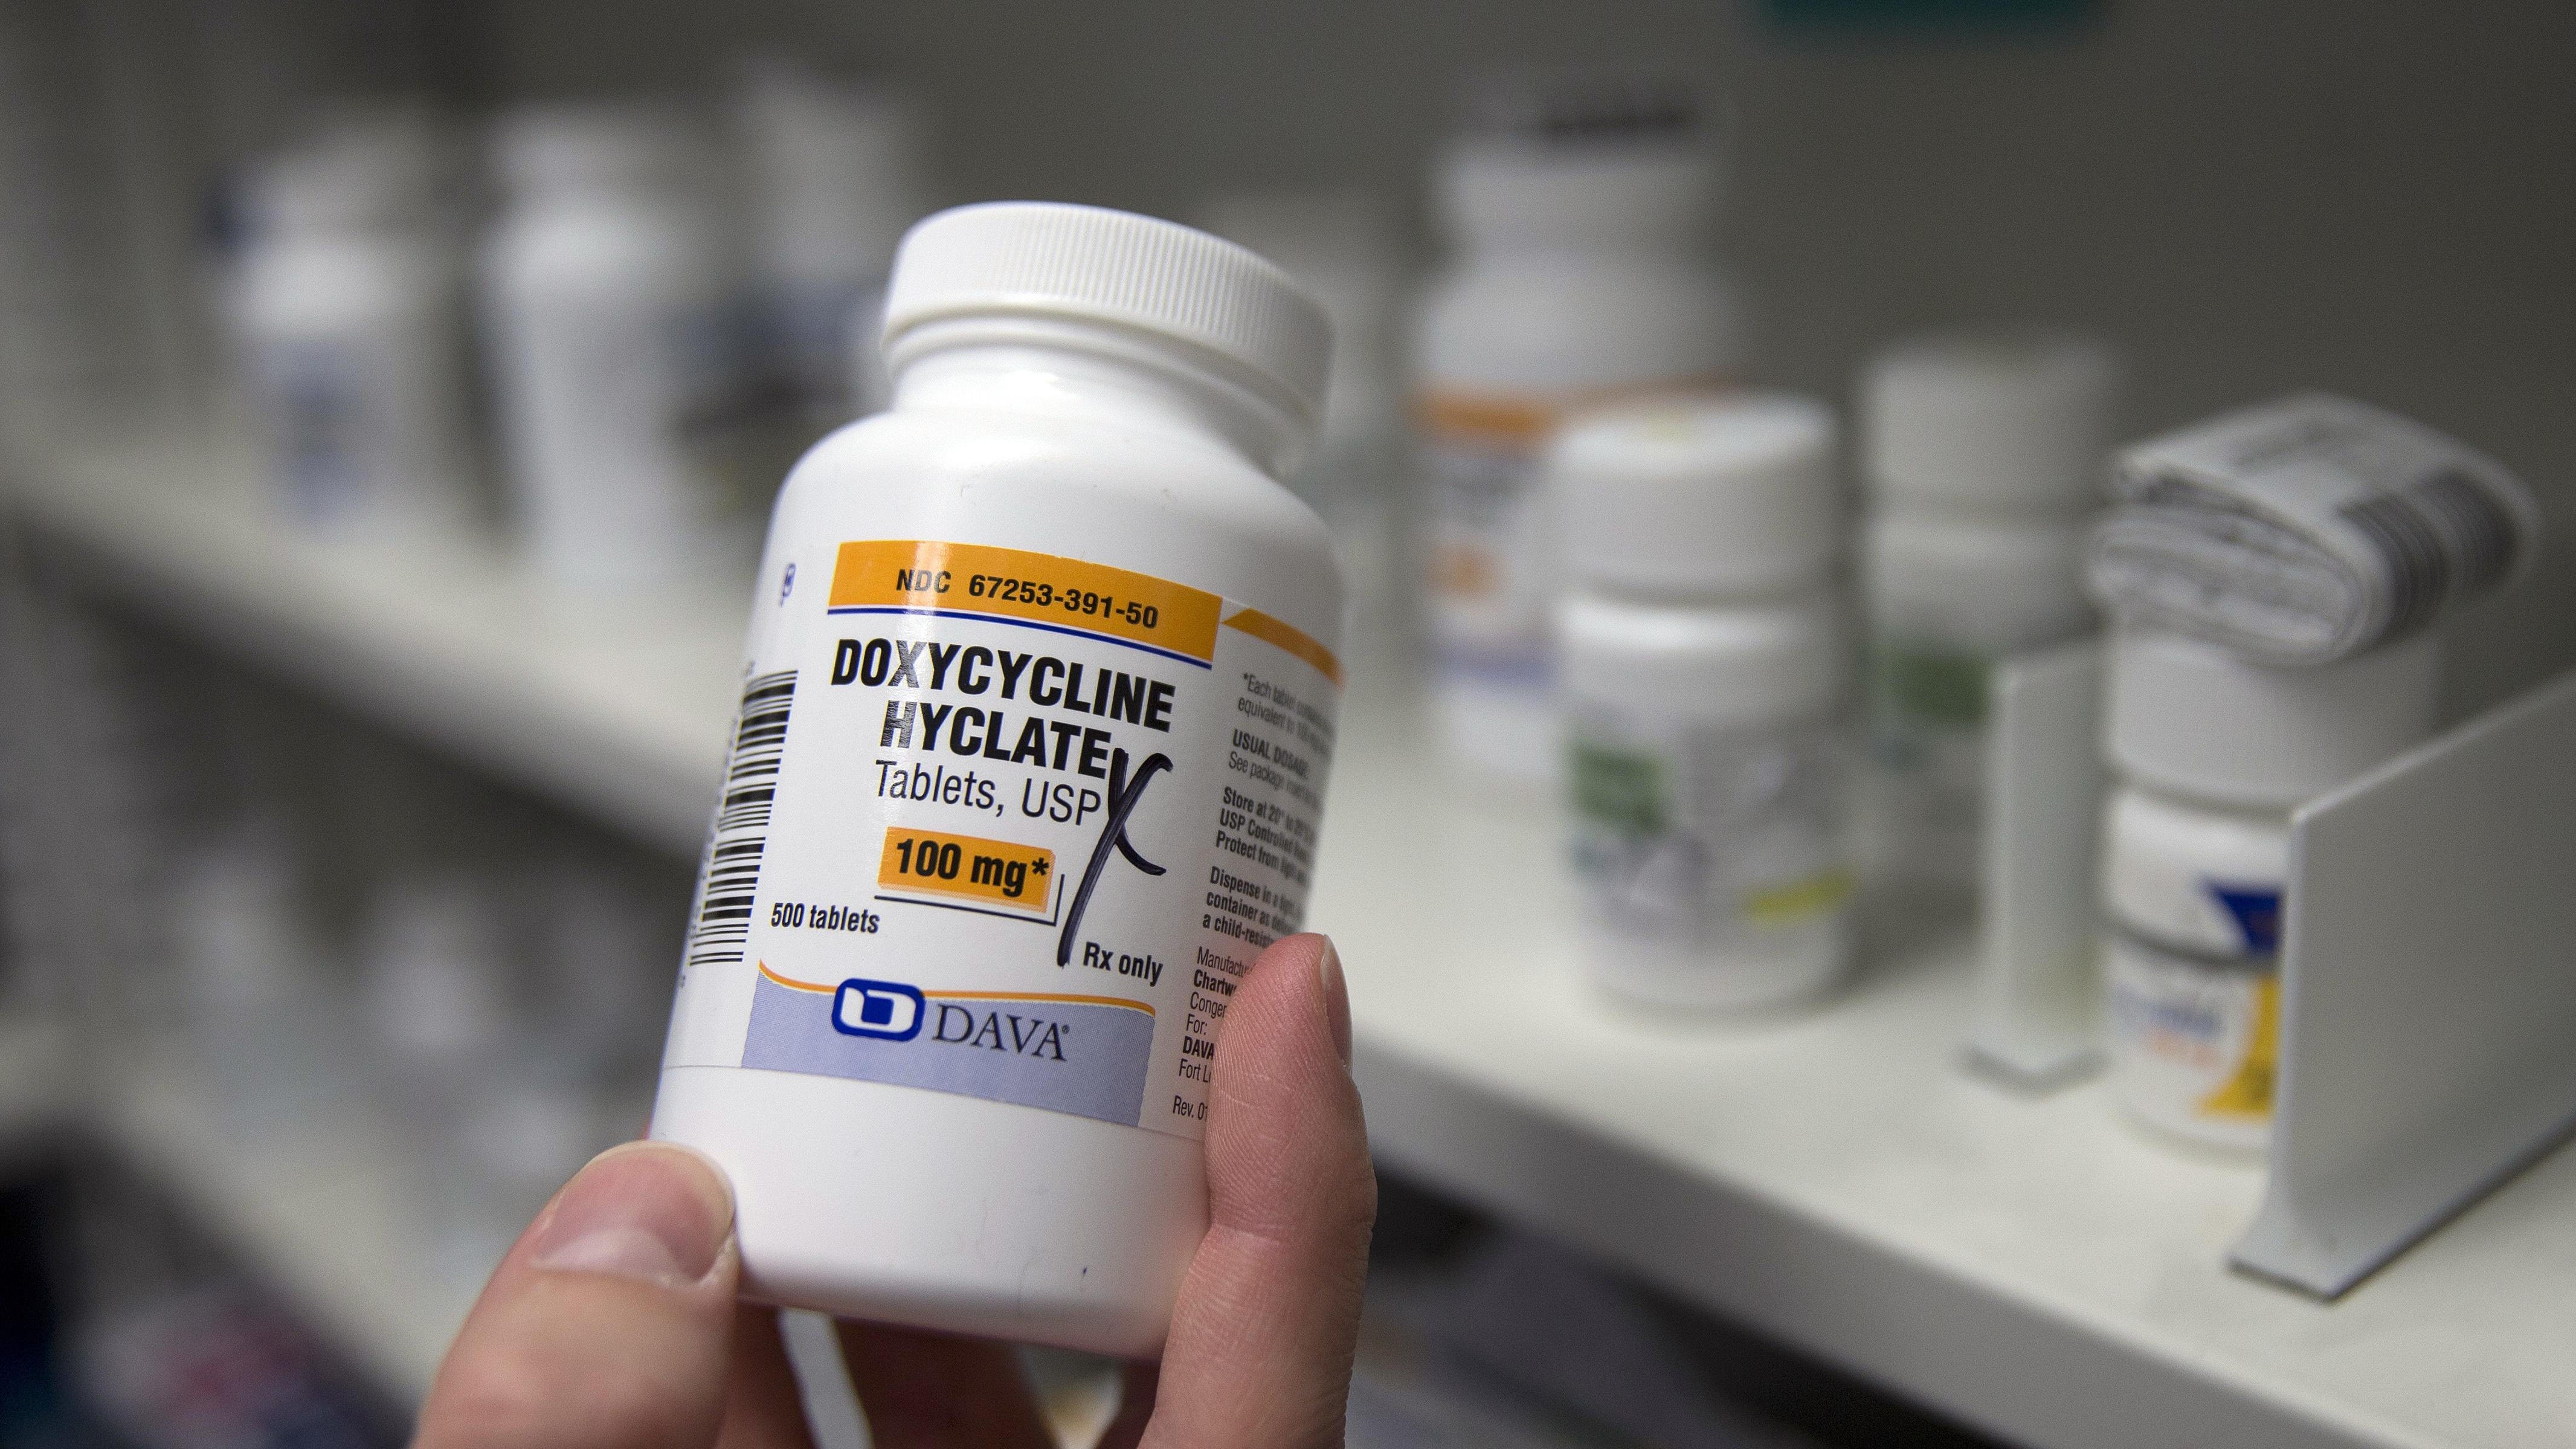 A pharmacist holds a bottle of the antibiotic doxycycline hyclate in Sacramento, Calif. According to a study released on Monday, kids who were seen via telemedicine visits were far more likely to be prescribed antibiotics than kids who went to a doctor’s office or clinic.